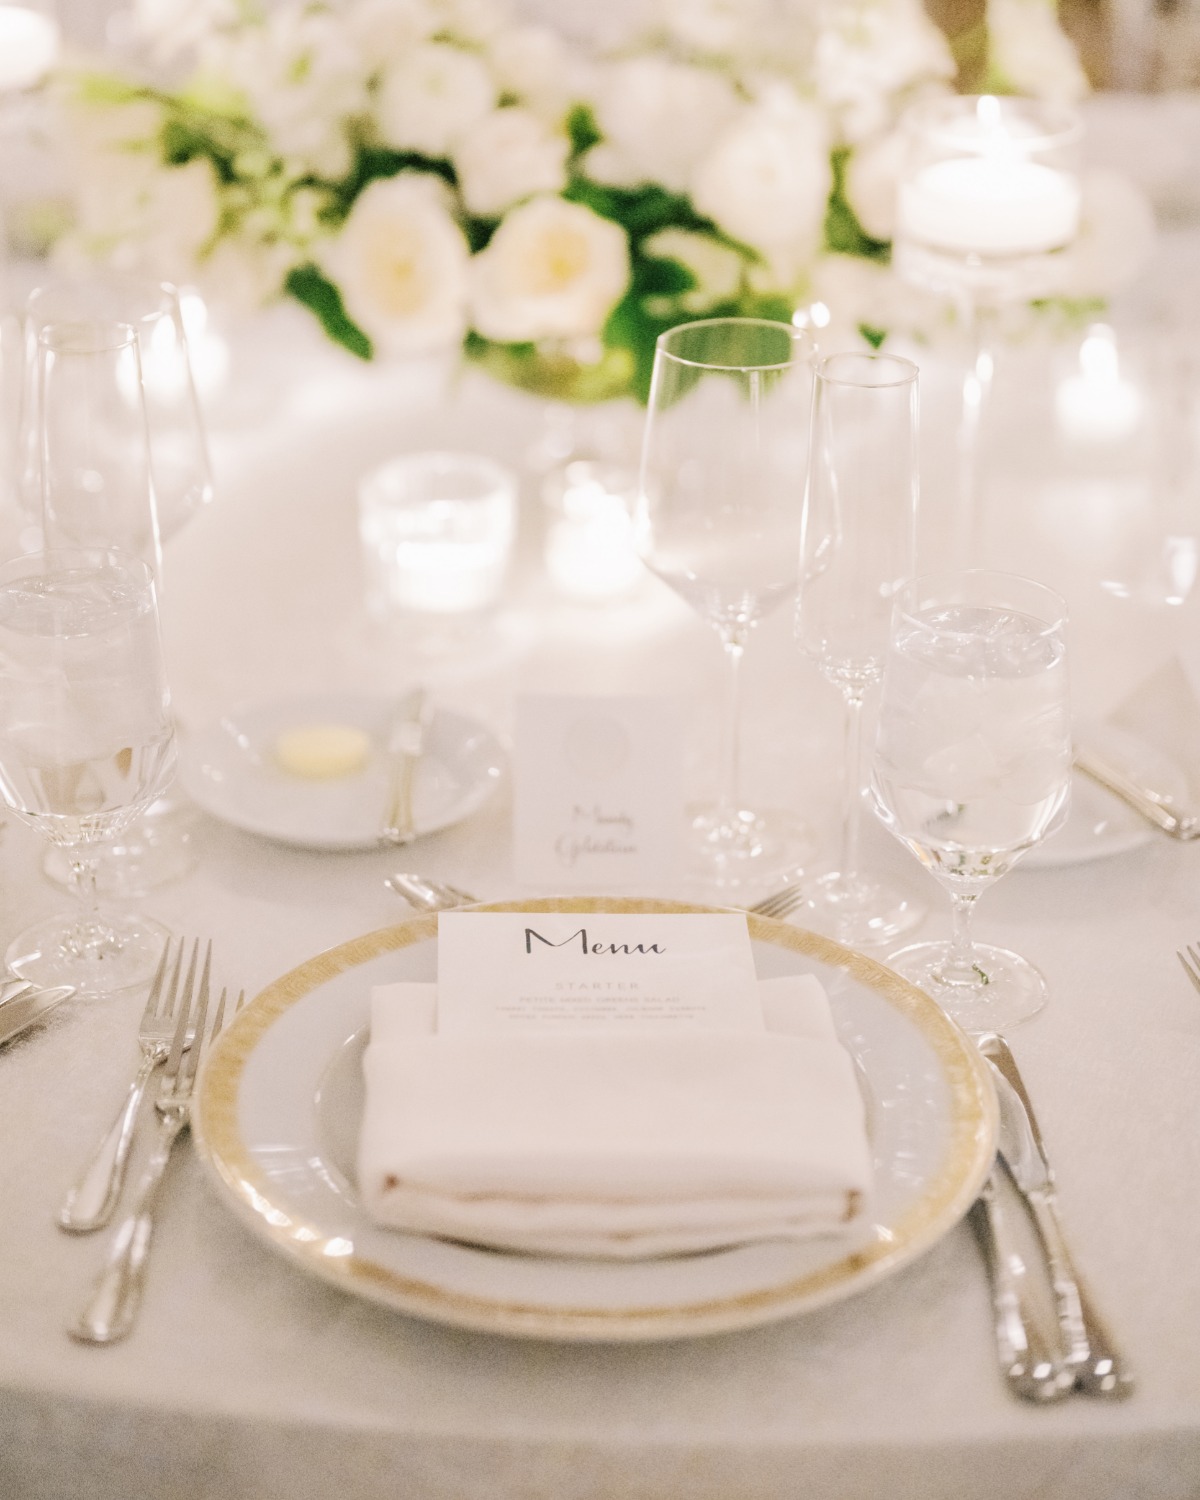 gold-rimmed place settings